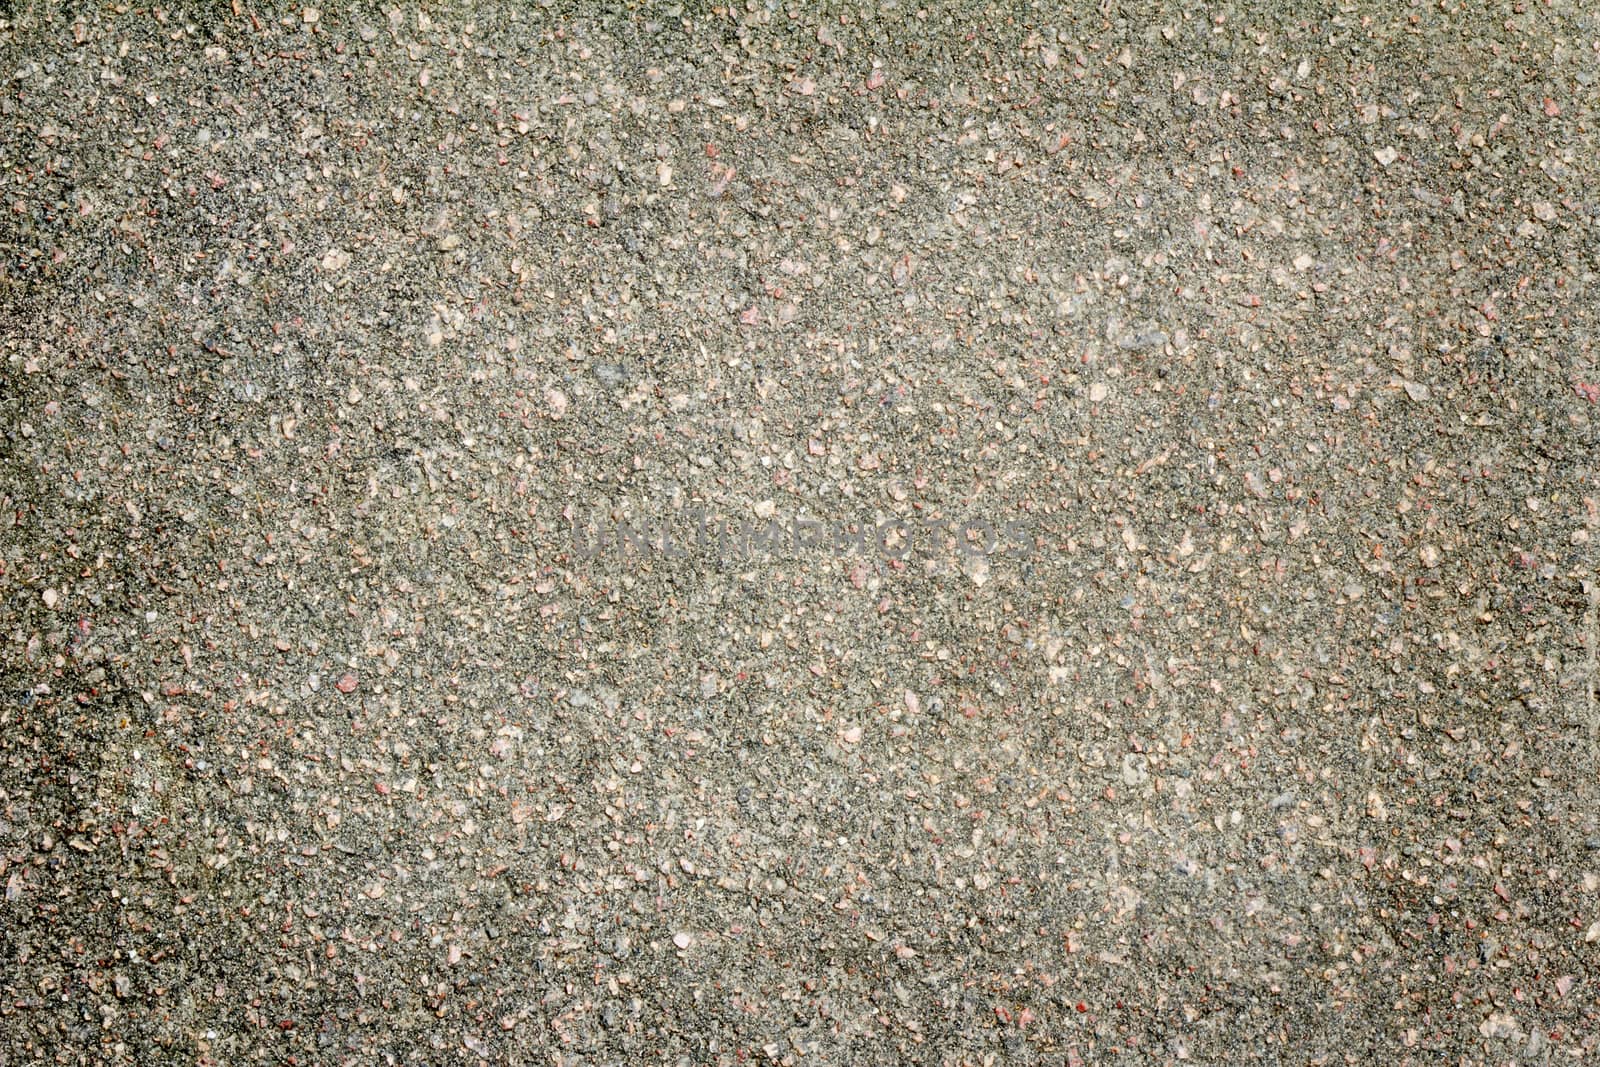 Photographed close-up section of the old asphalt road ( background ).
